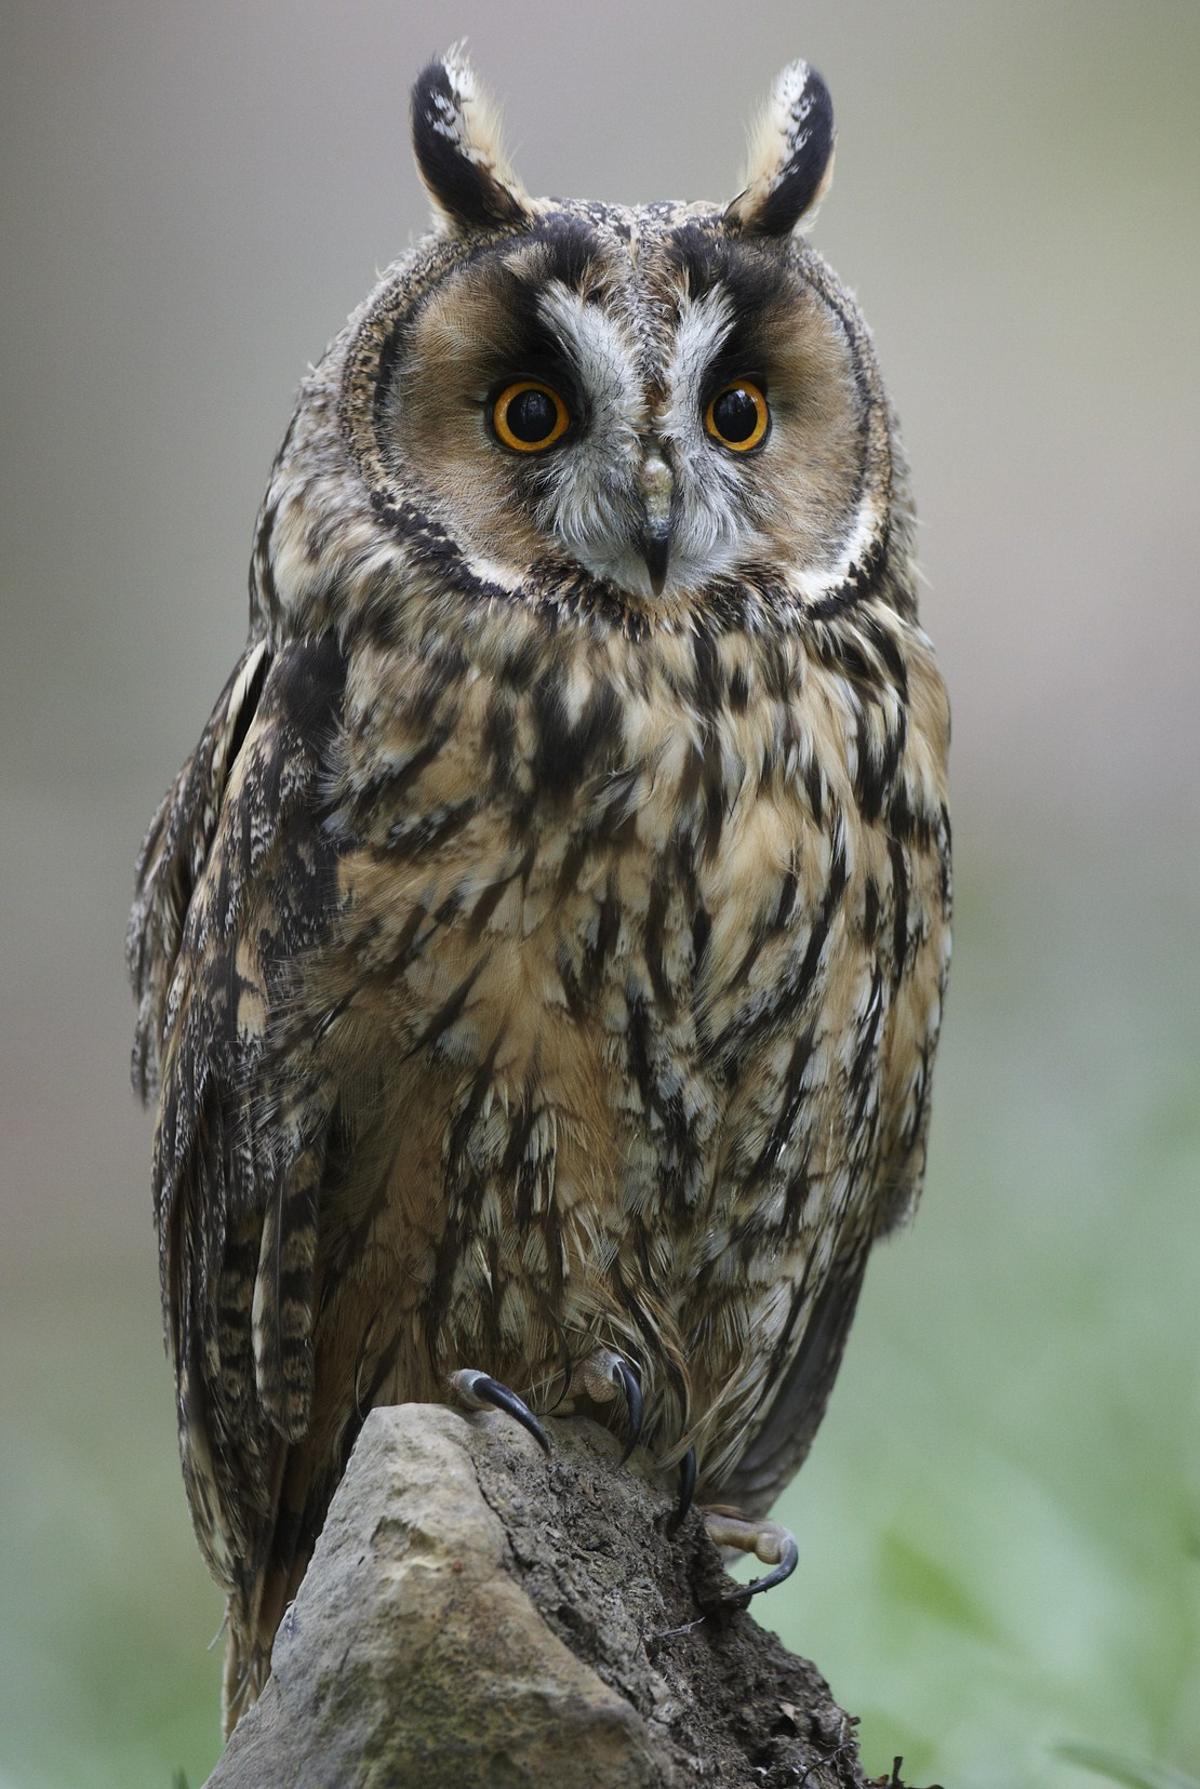 A Brief Introduction to the Common Types of Owls